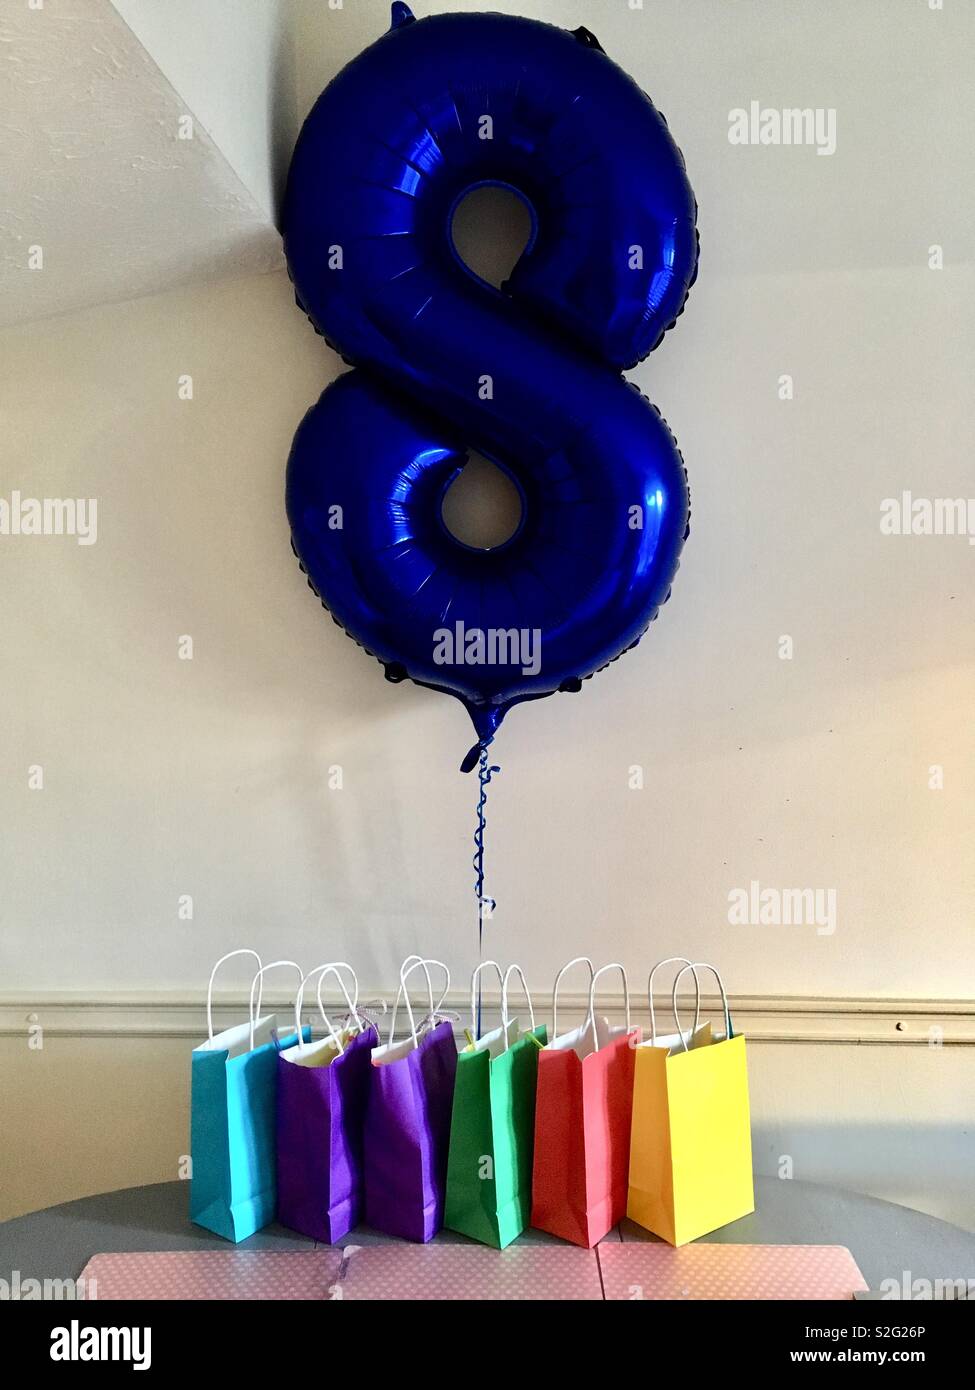 Eight Is Great Birthday Party Decorations, Rainbow 8th Birthday Latex  Balloons Gradient 8 Foil Balloon Birthday Banner Decor for Its Great to be  Eight Boys and Girls Colorful 8th Birthday Party 